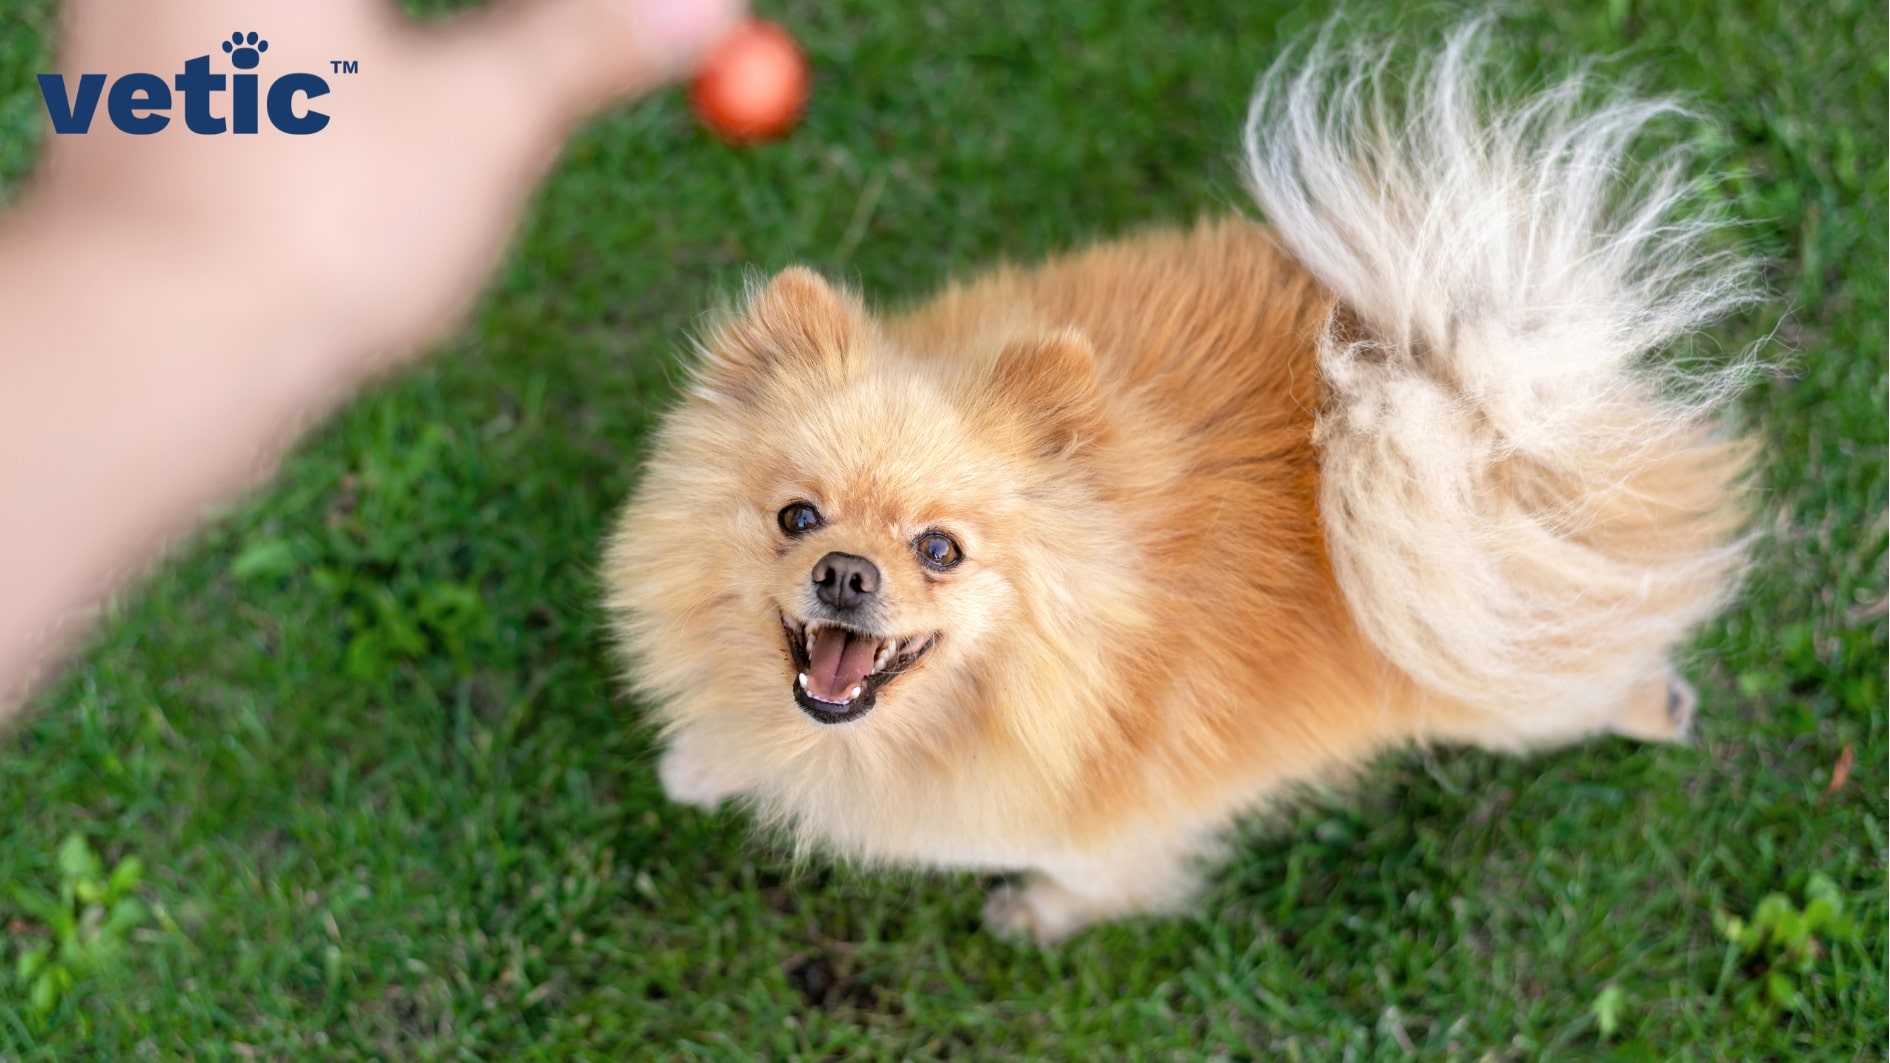 Top shot of an orange Pomeranian staring up at the hand beside the camera holding something similar to a small red ball.